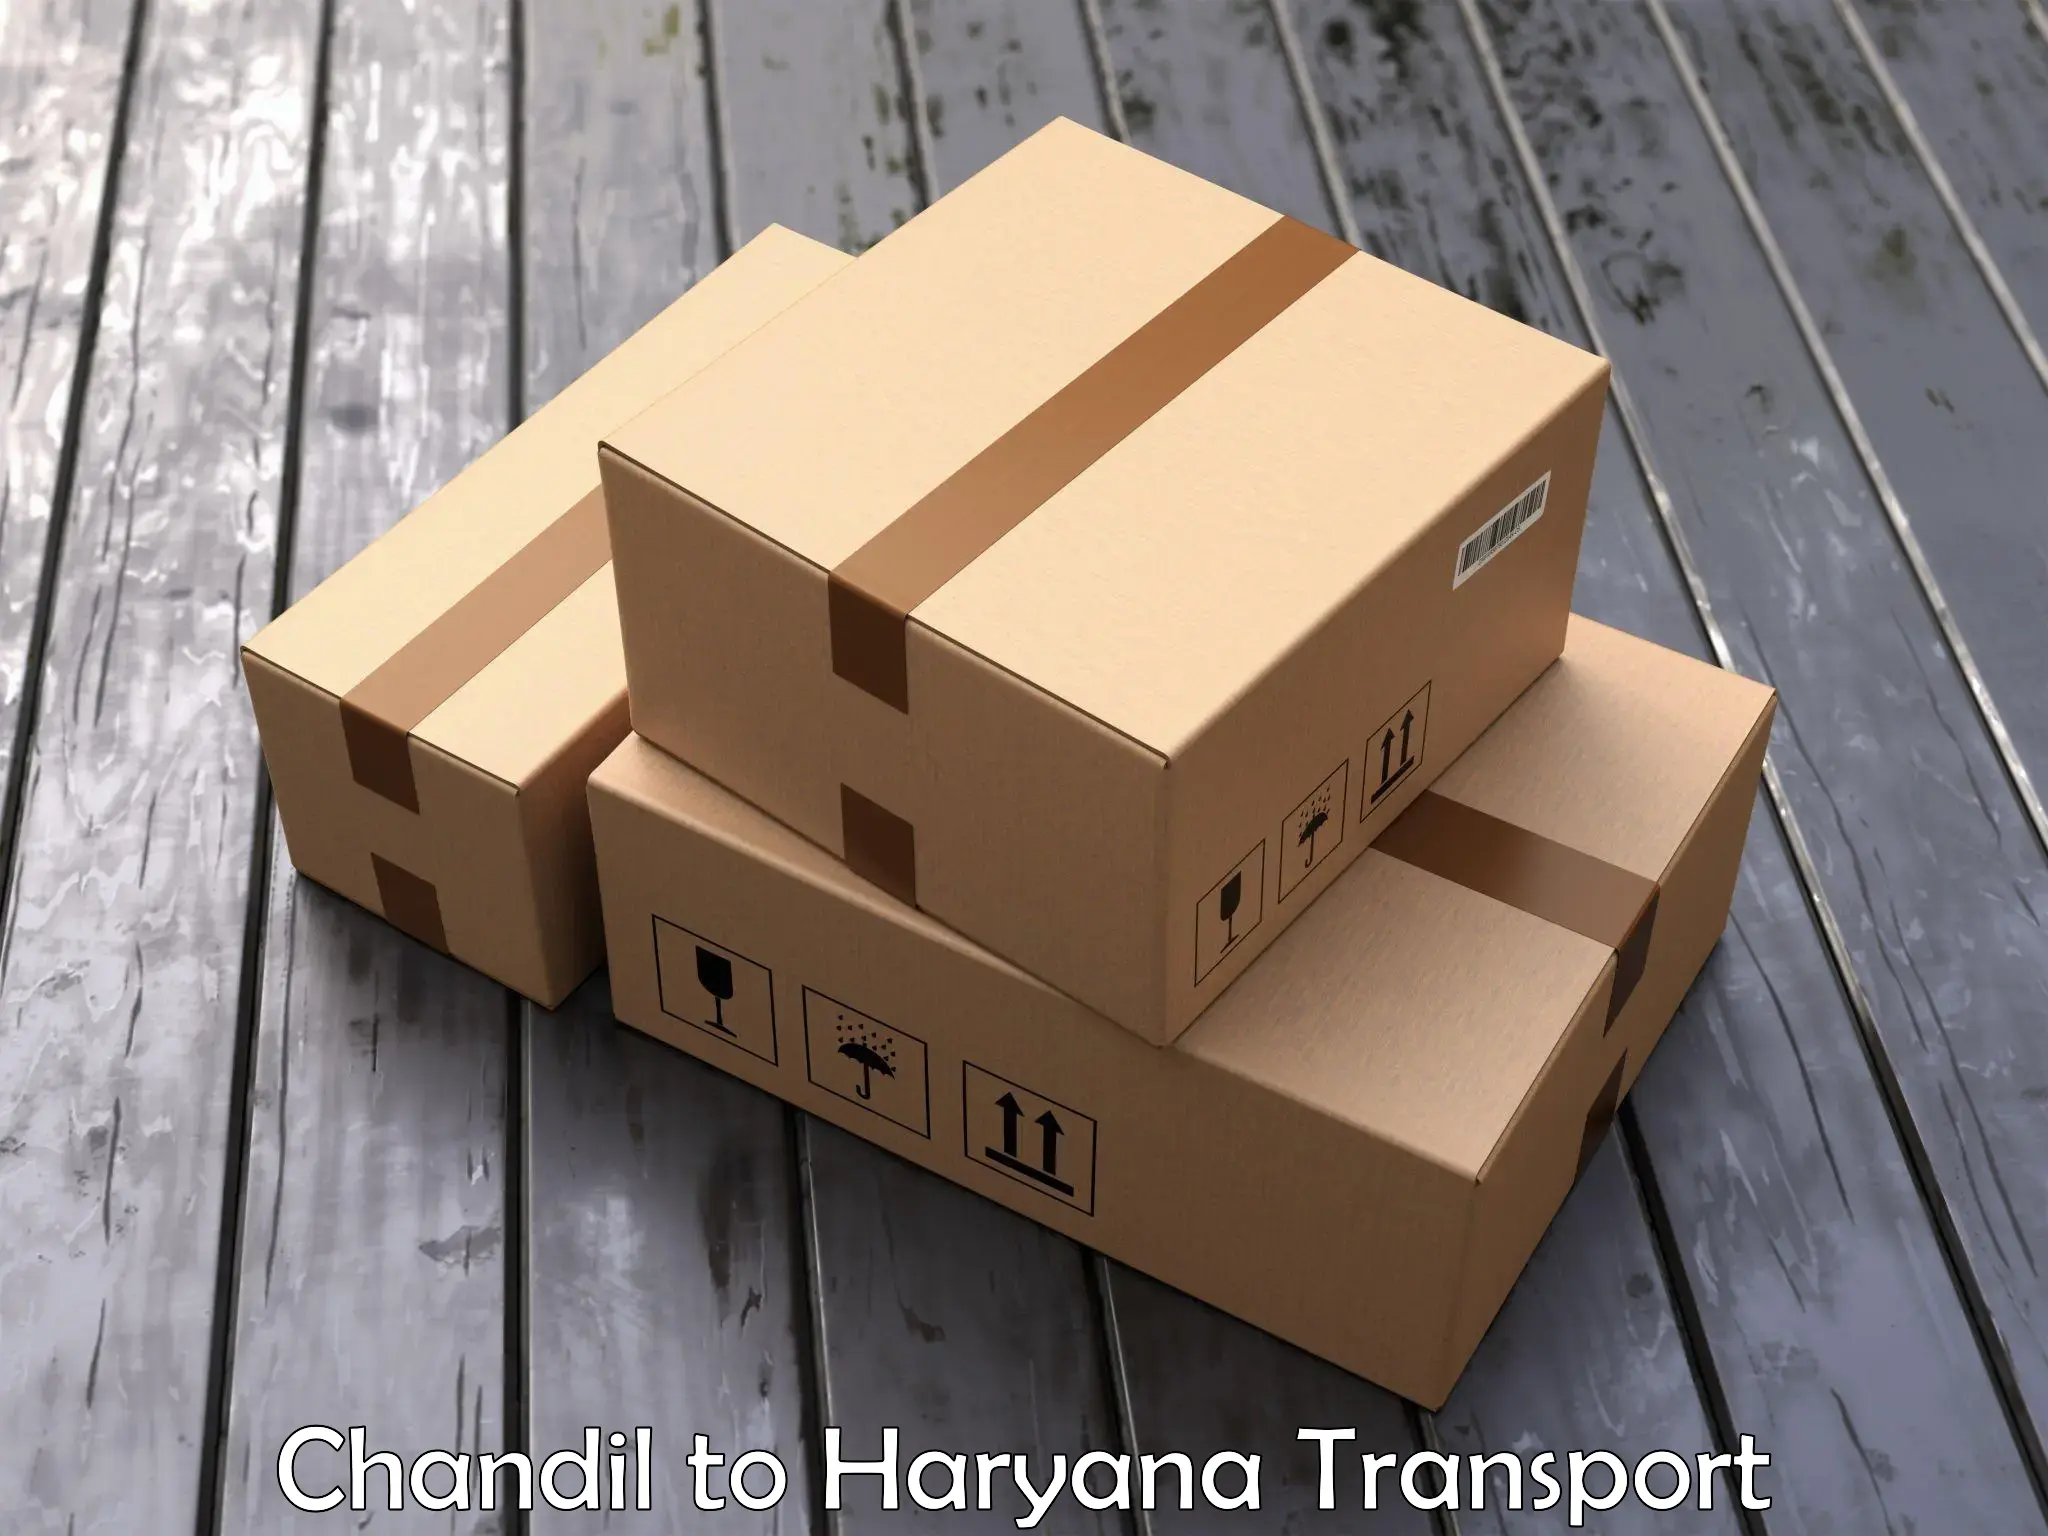 Truck transport companies in India Chandil to Narwana